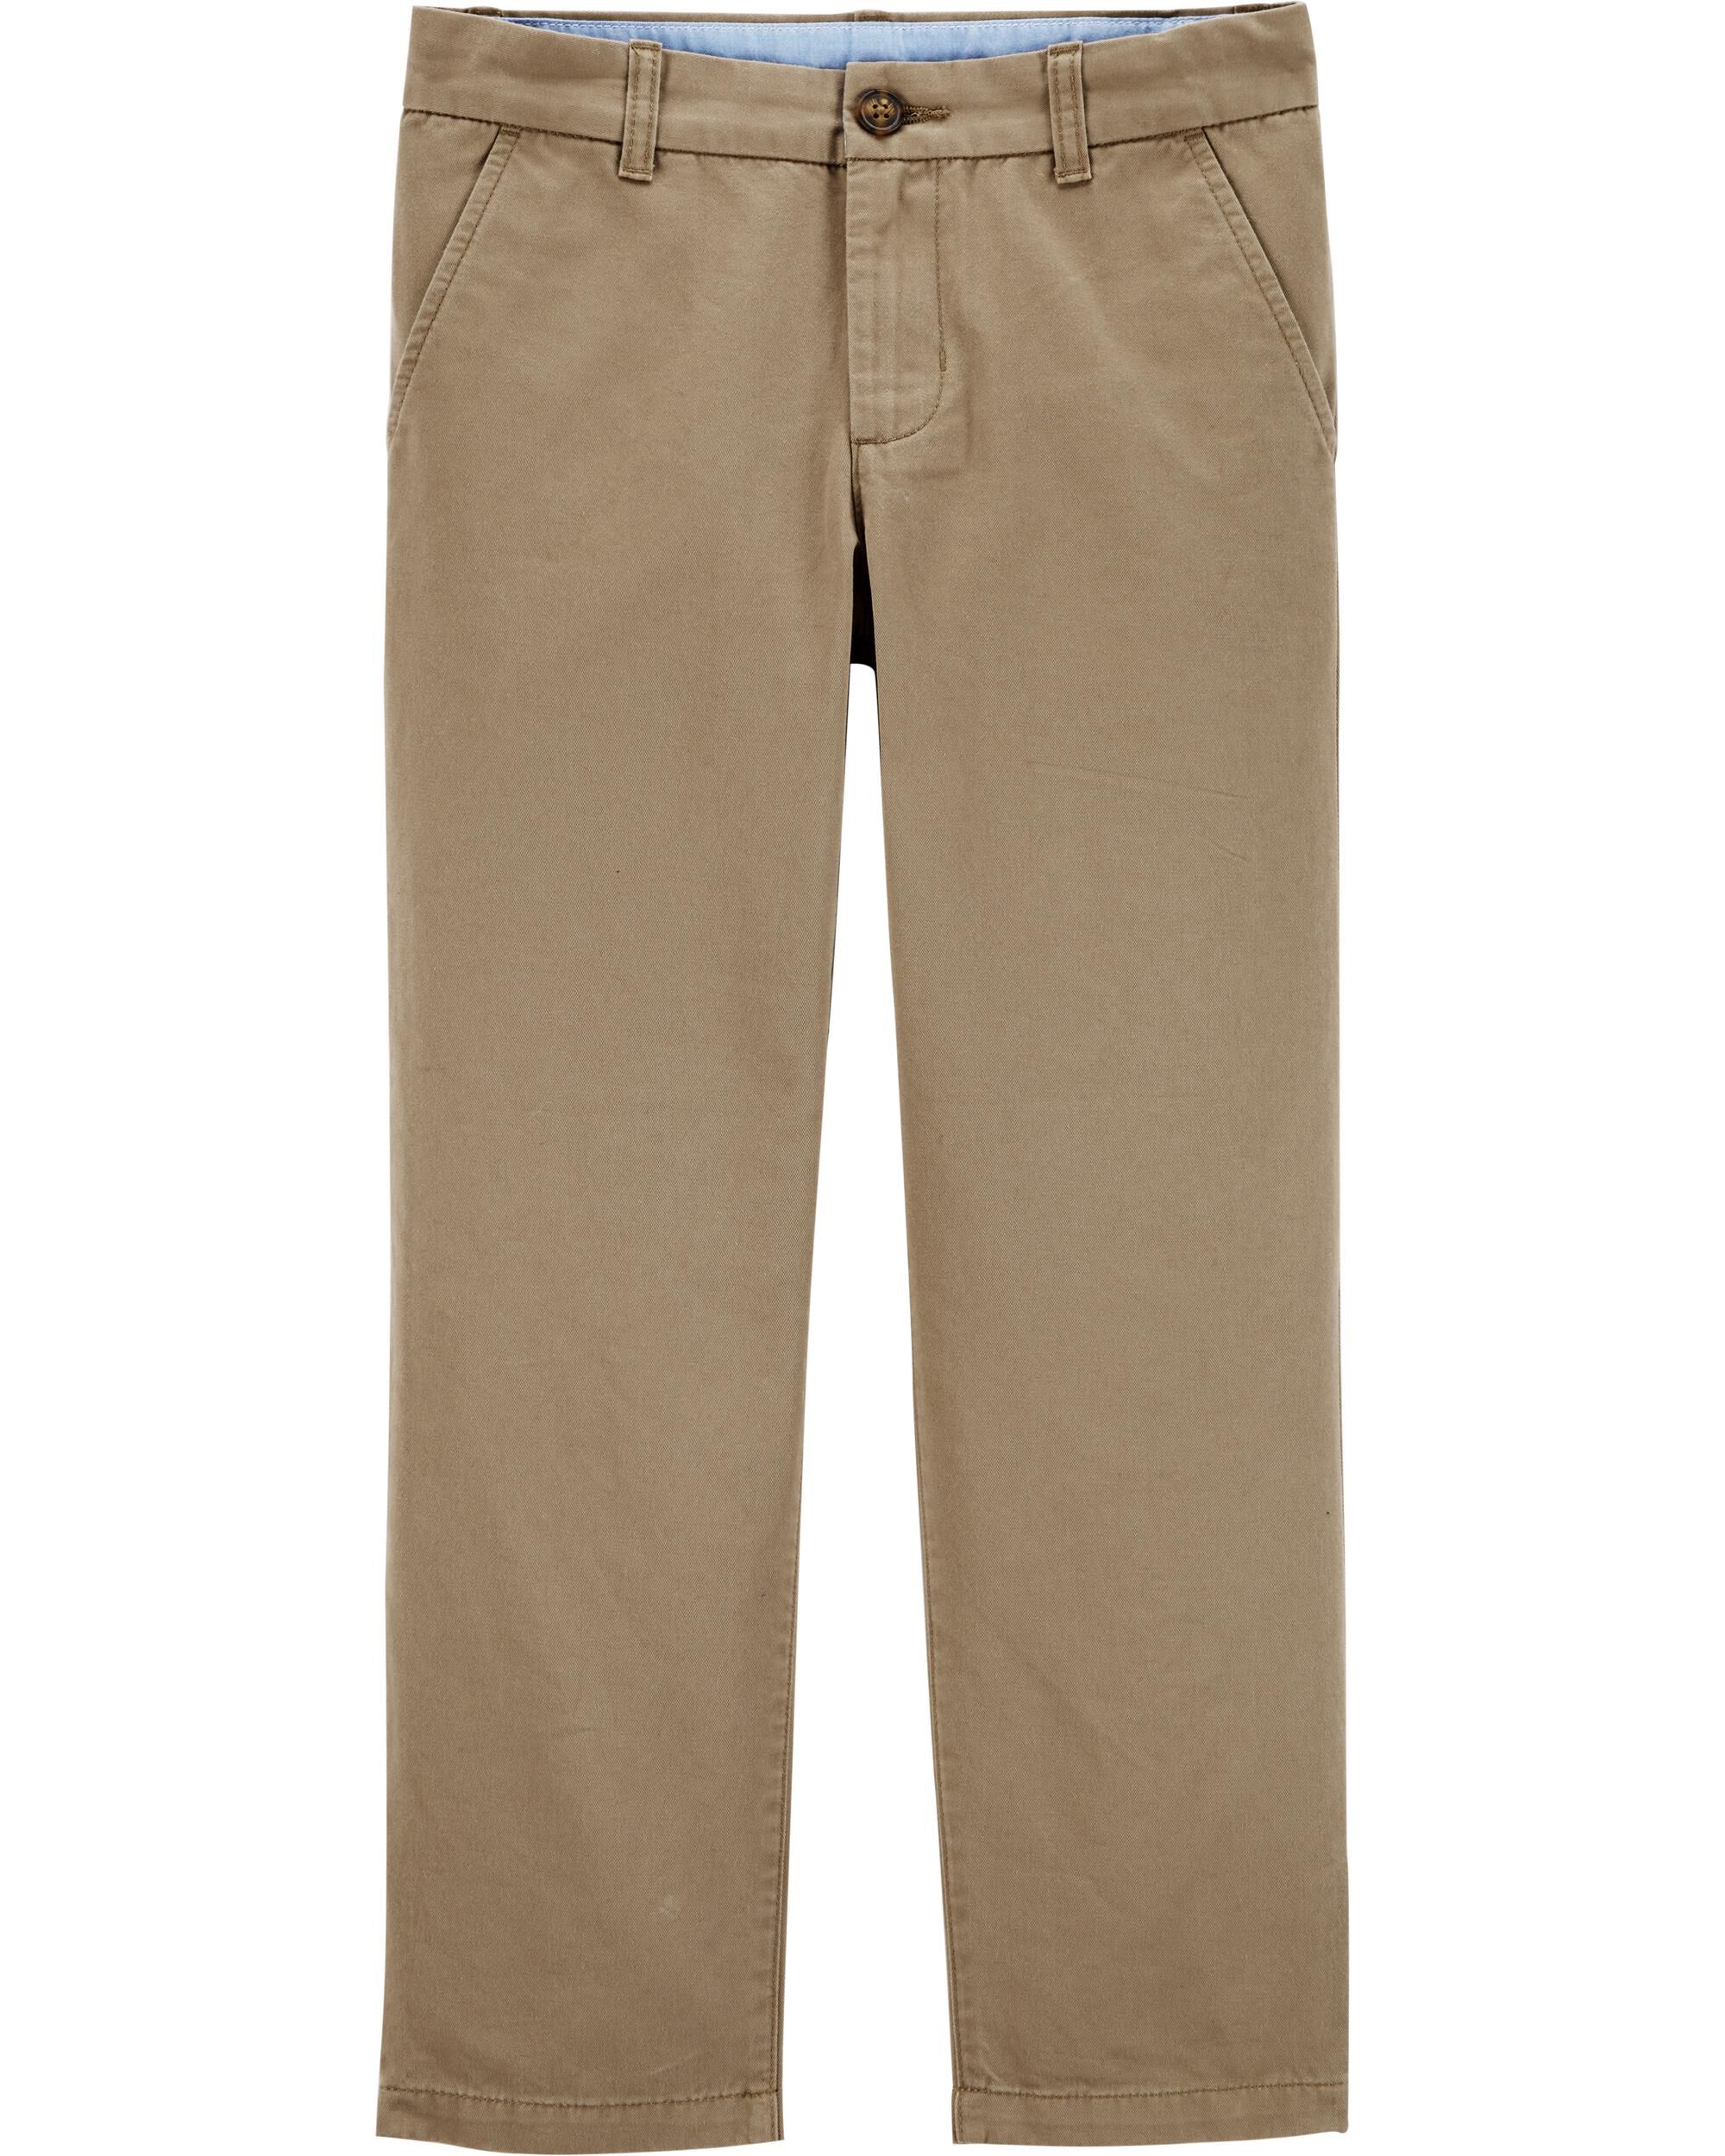 Details about   Carters Pull On Khaki Pants 